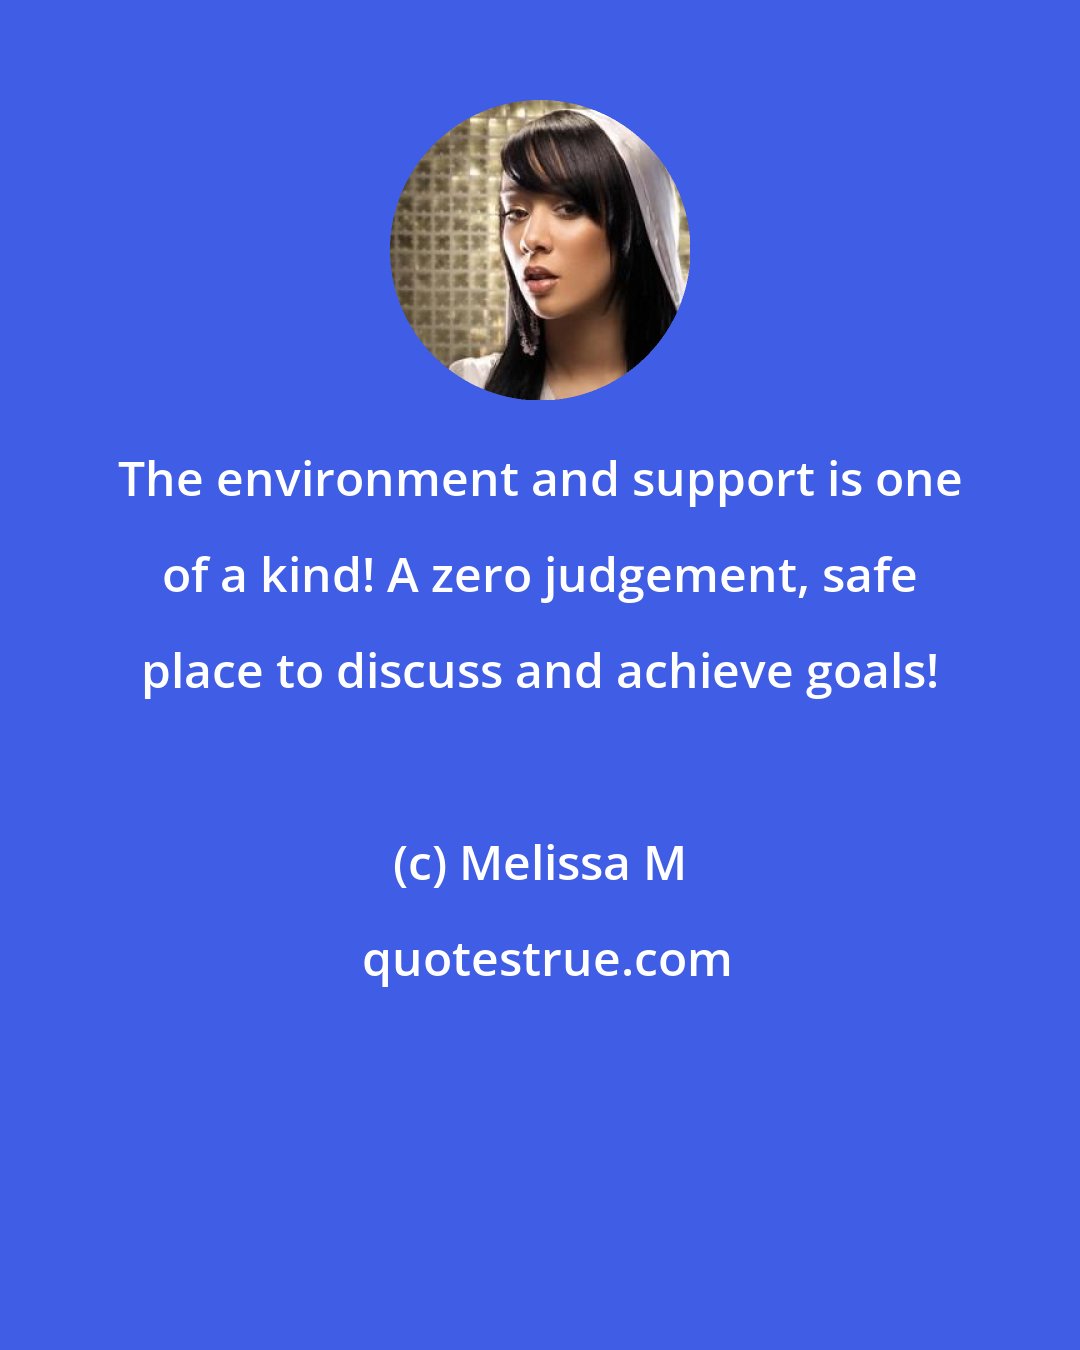 Melissa M: The environment and support is one of a kind! A zero judgement, safe place to discuss and achieve goals!